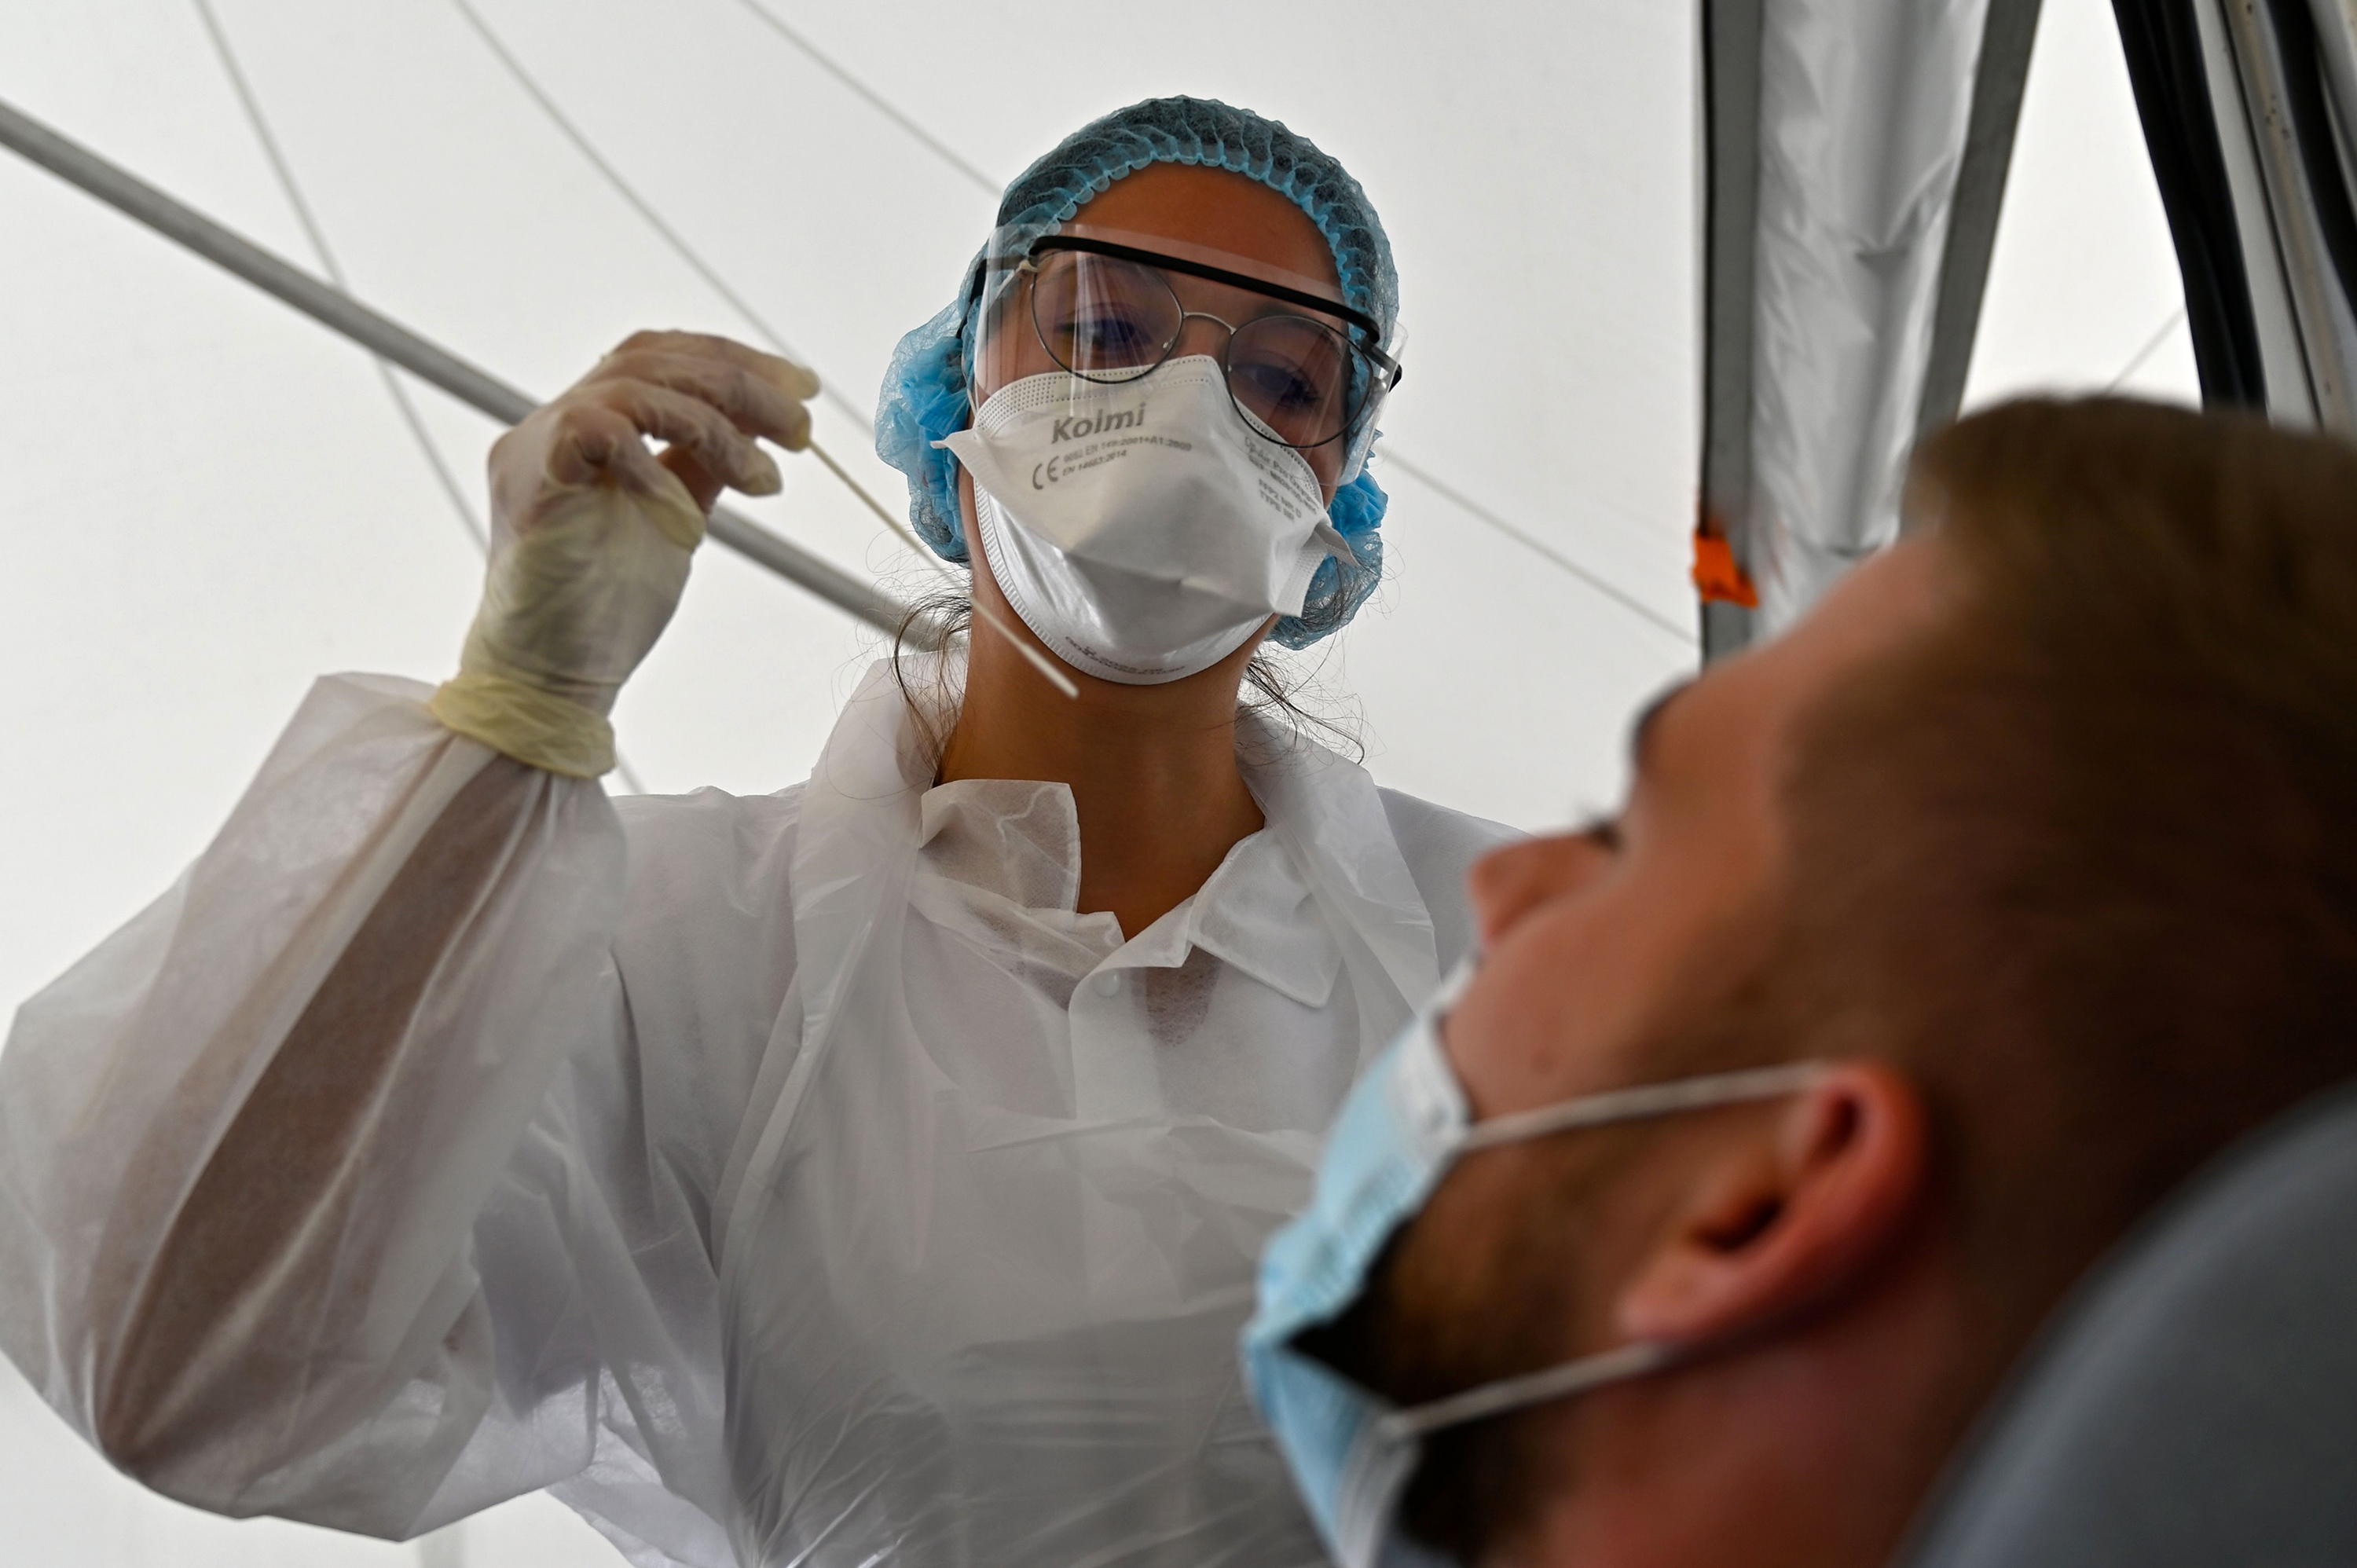 A health official conducts a Covid-19 test in Rennes, France, on September 7.